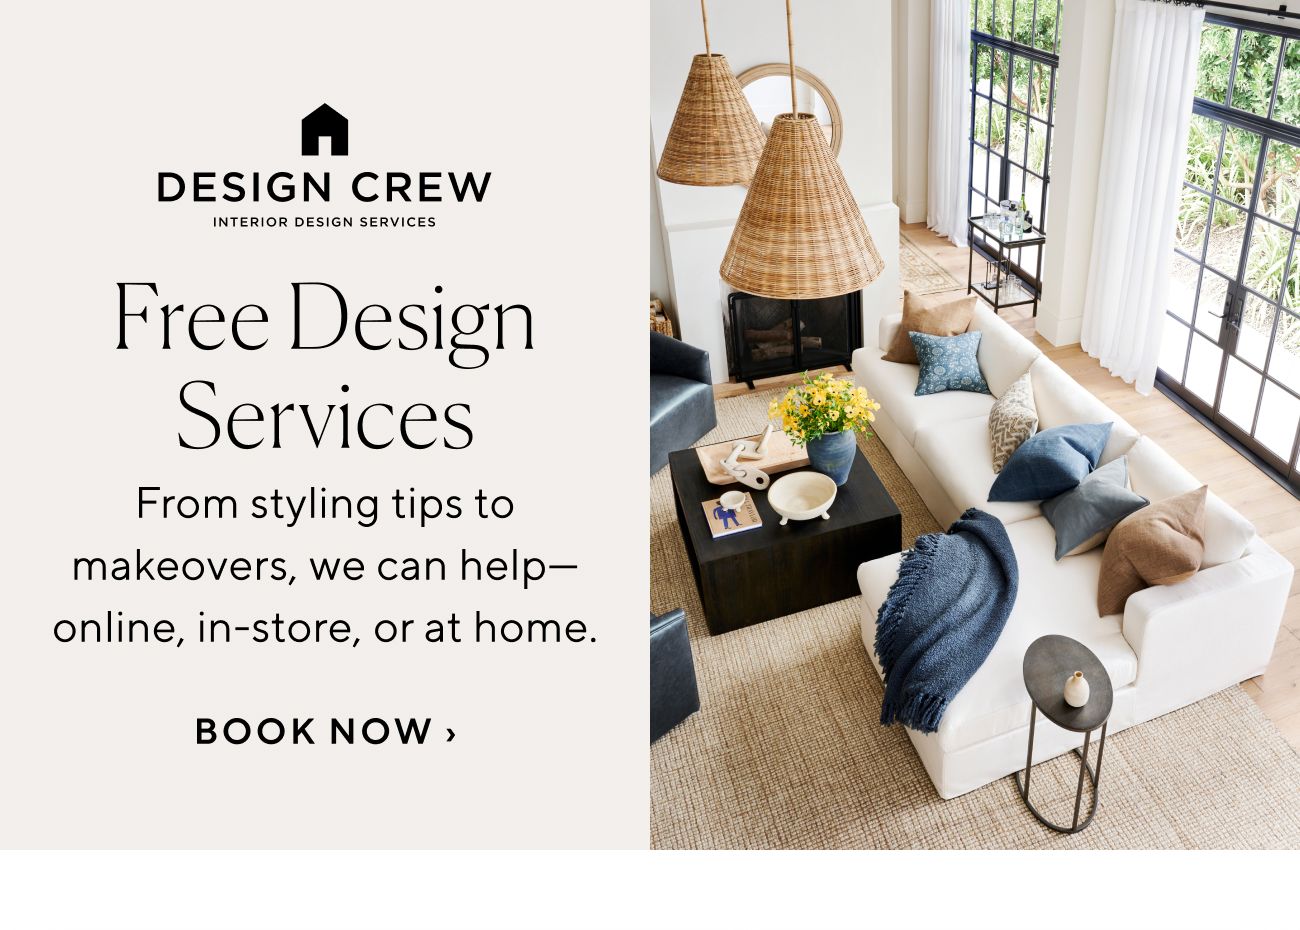 DESIGN CREW ssssssssssssssssssss Free Design Services From styling tips to makeovers, we can help online, in-store, or at home. BOOK NOW 